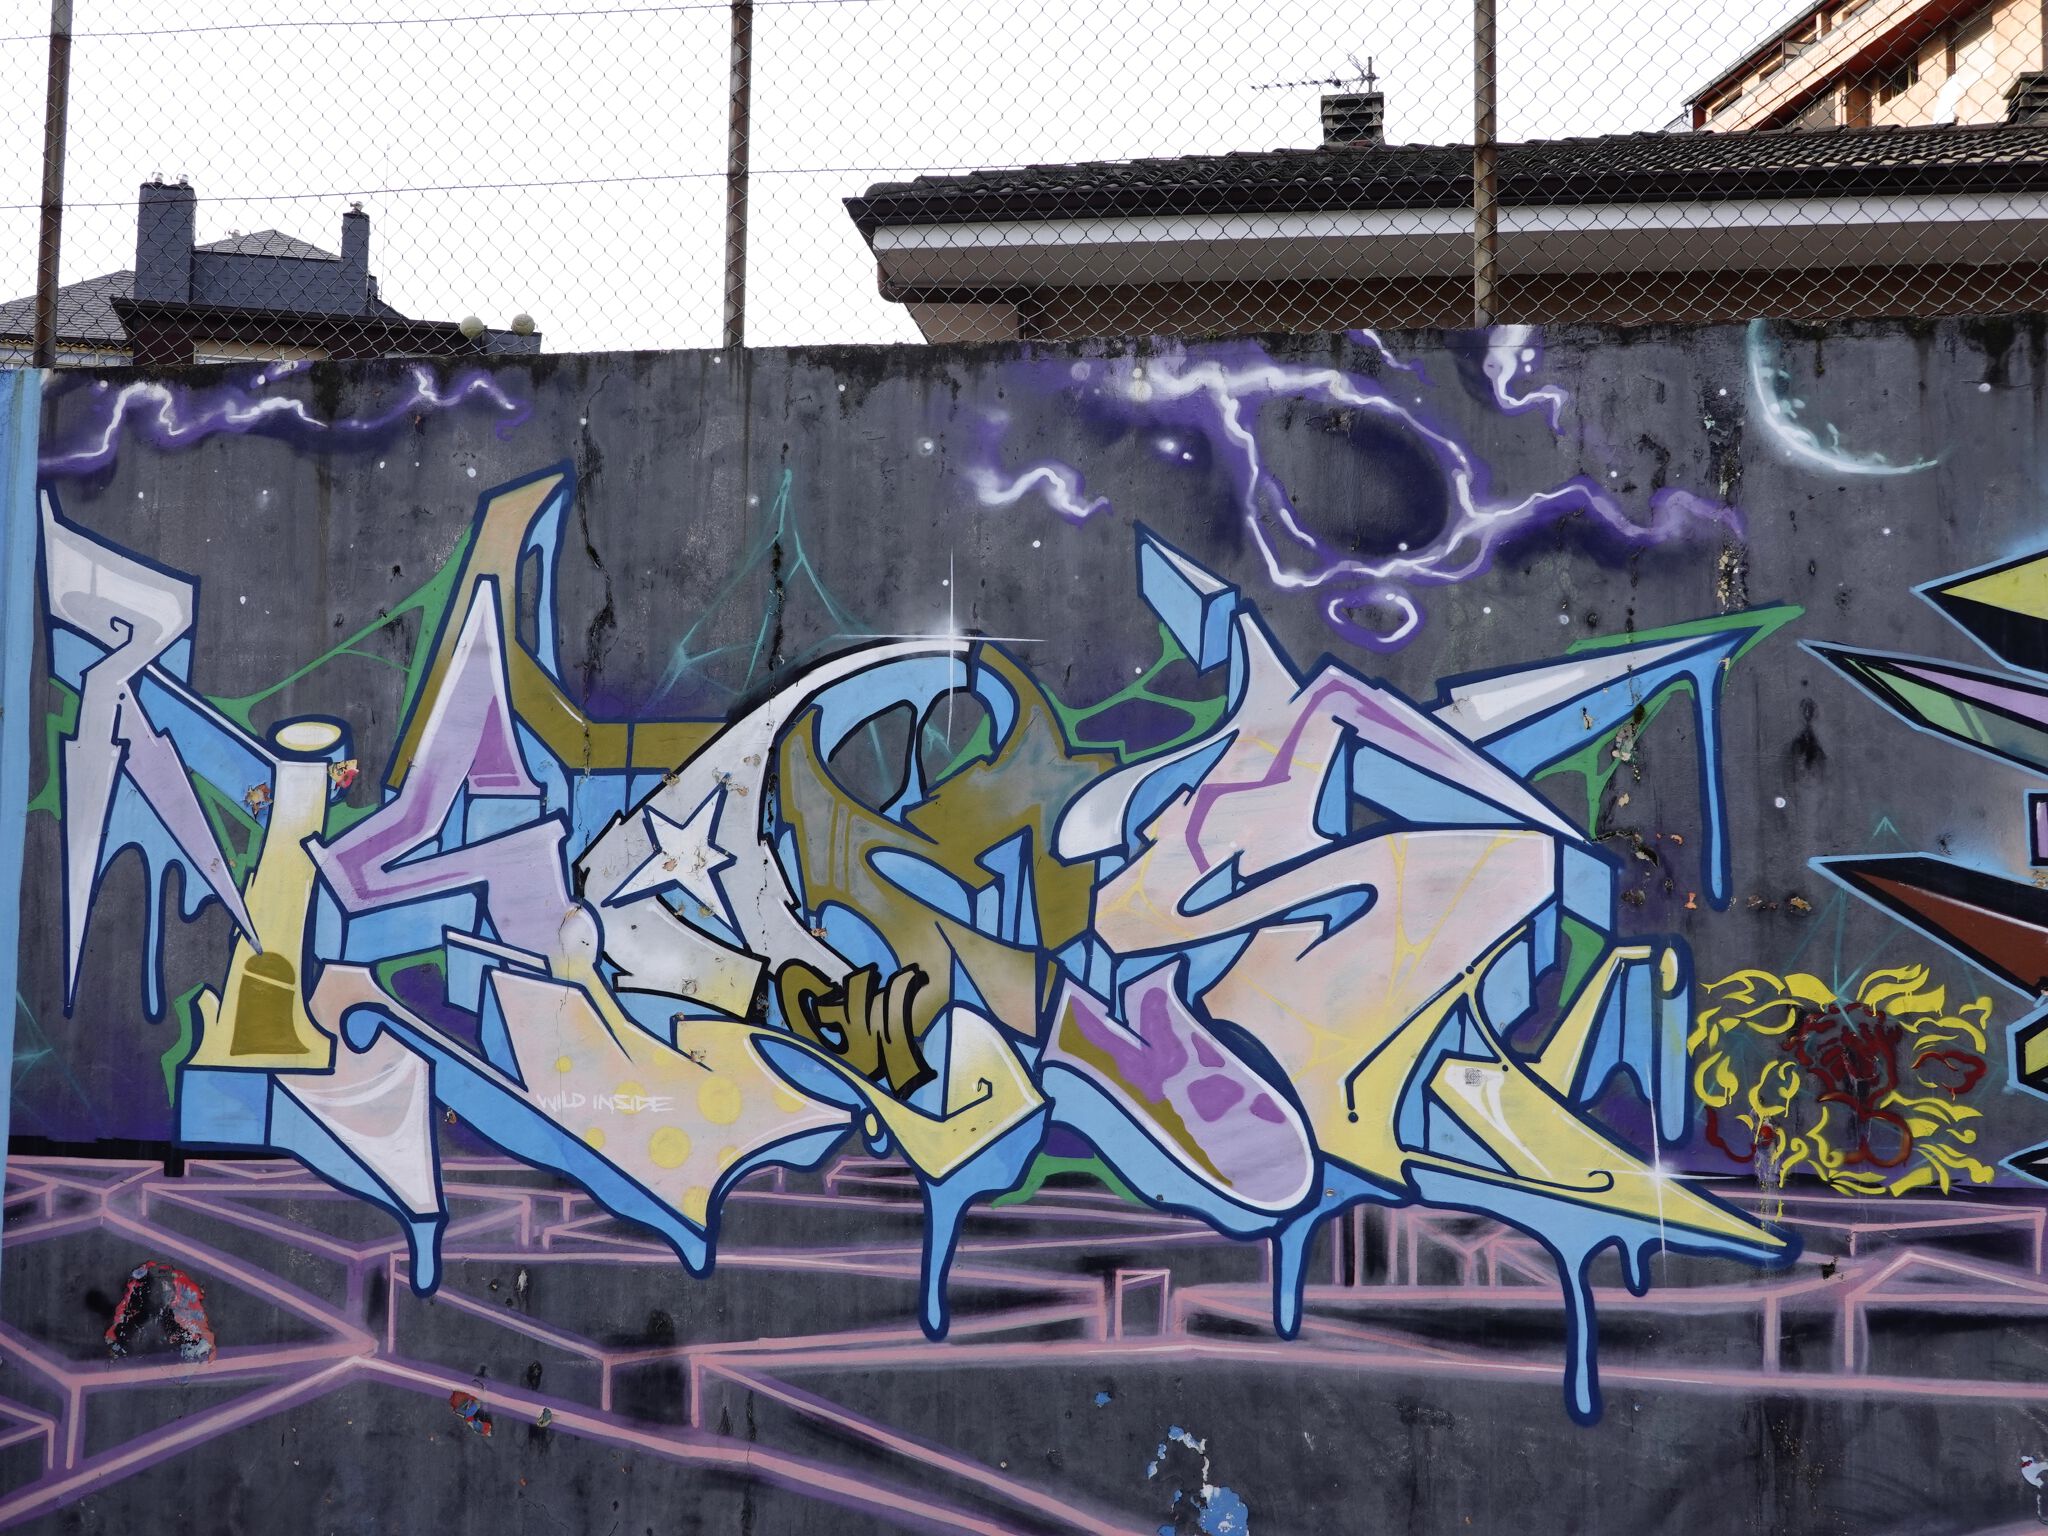 Jay Kaes, Rm crew&mdash;Not known - Desconocido 